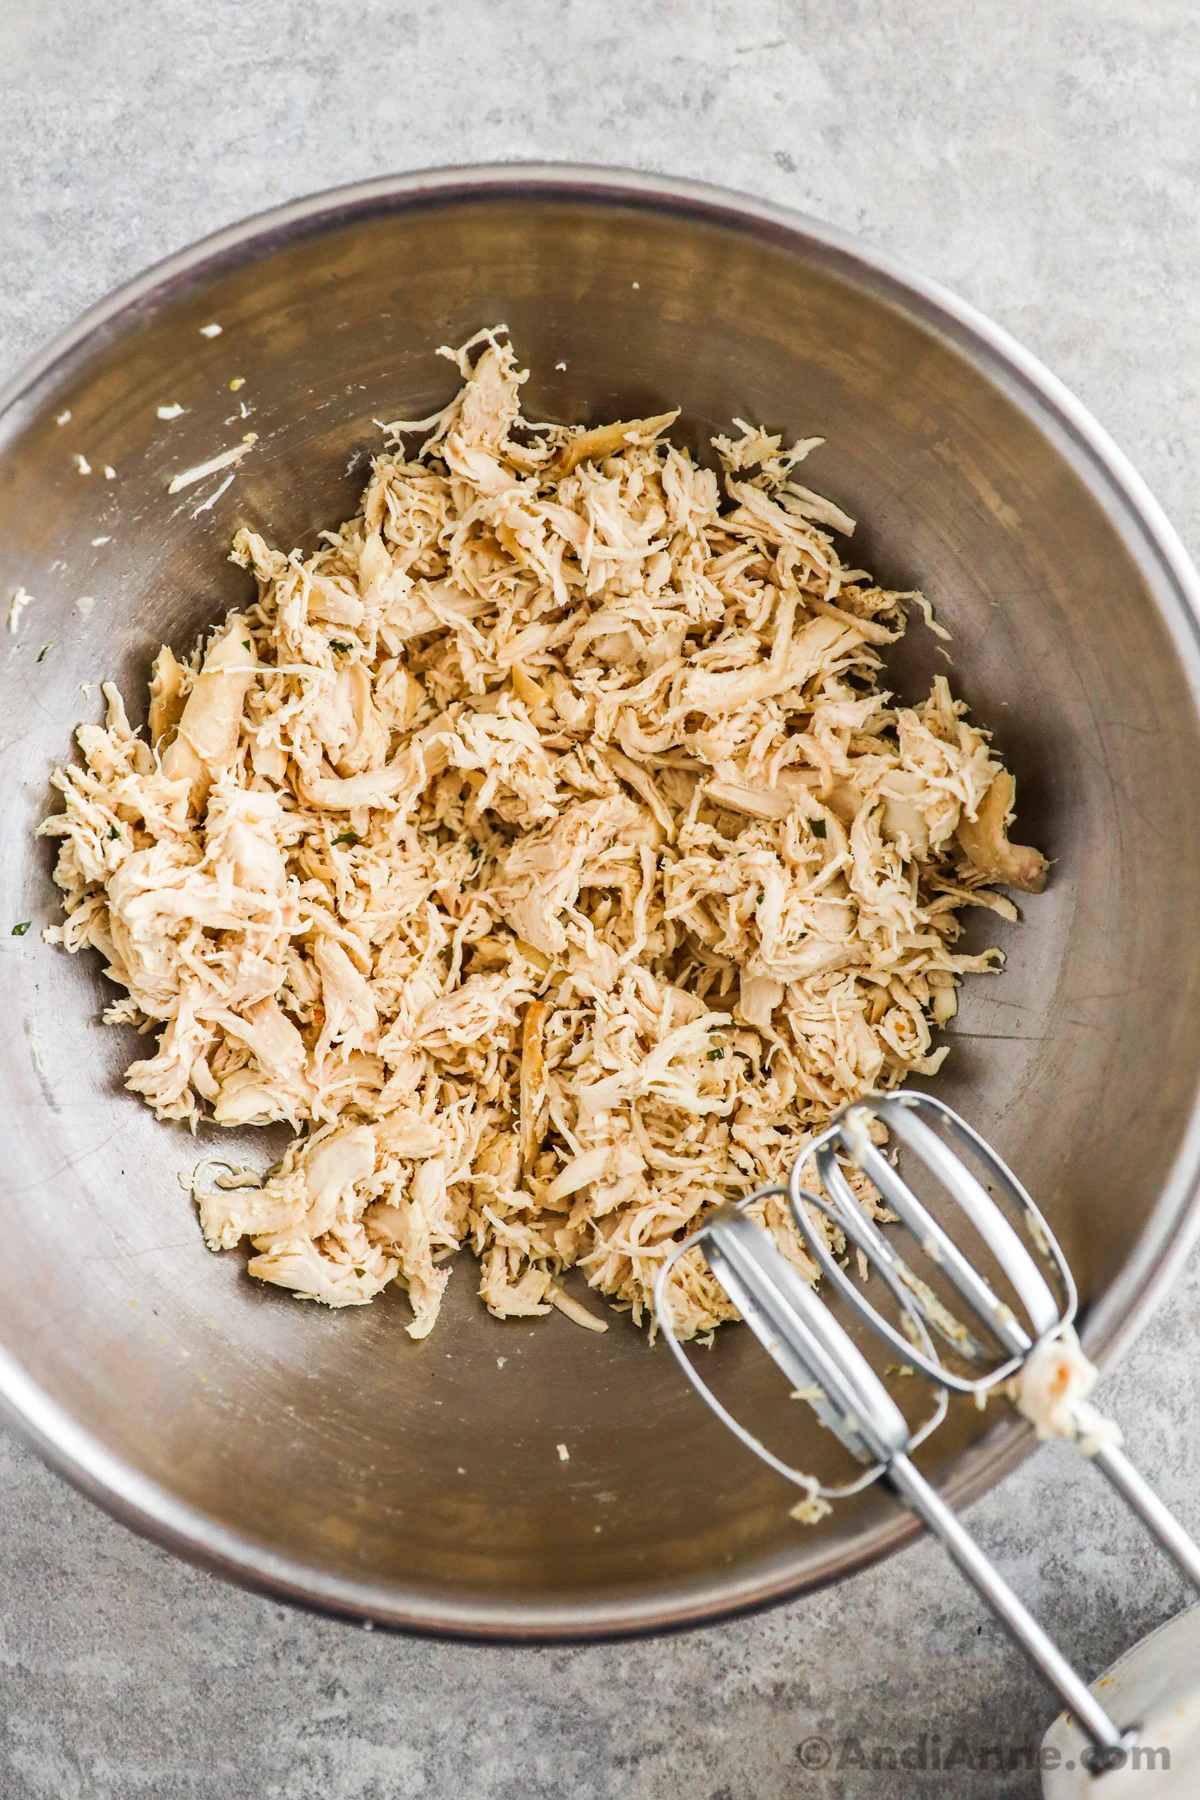 Shredded chicken in a large bowl with a hand mixer.